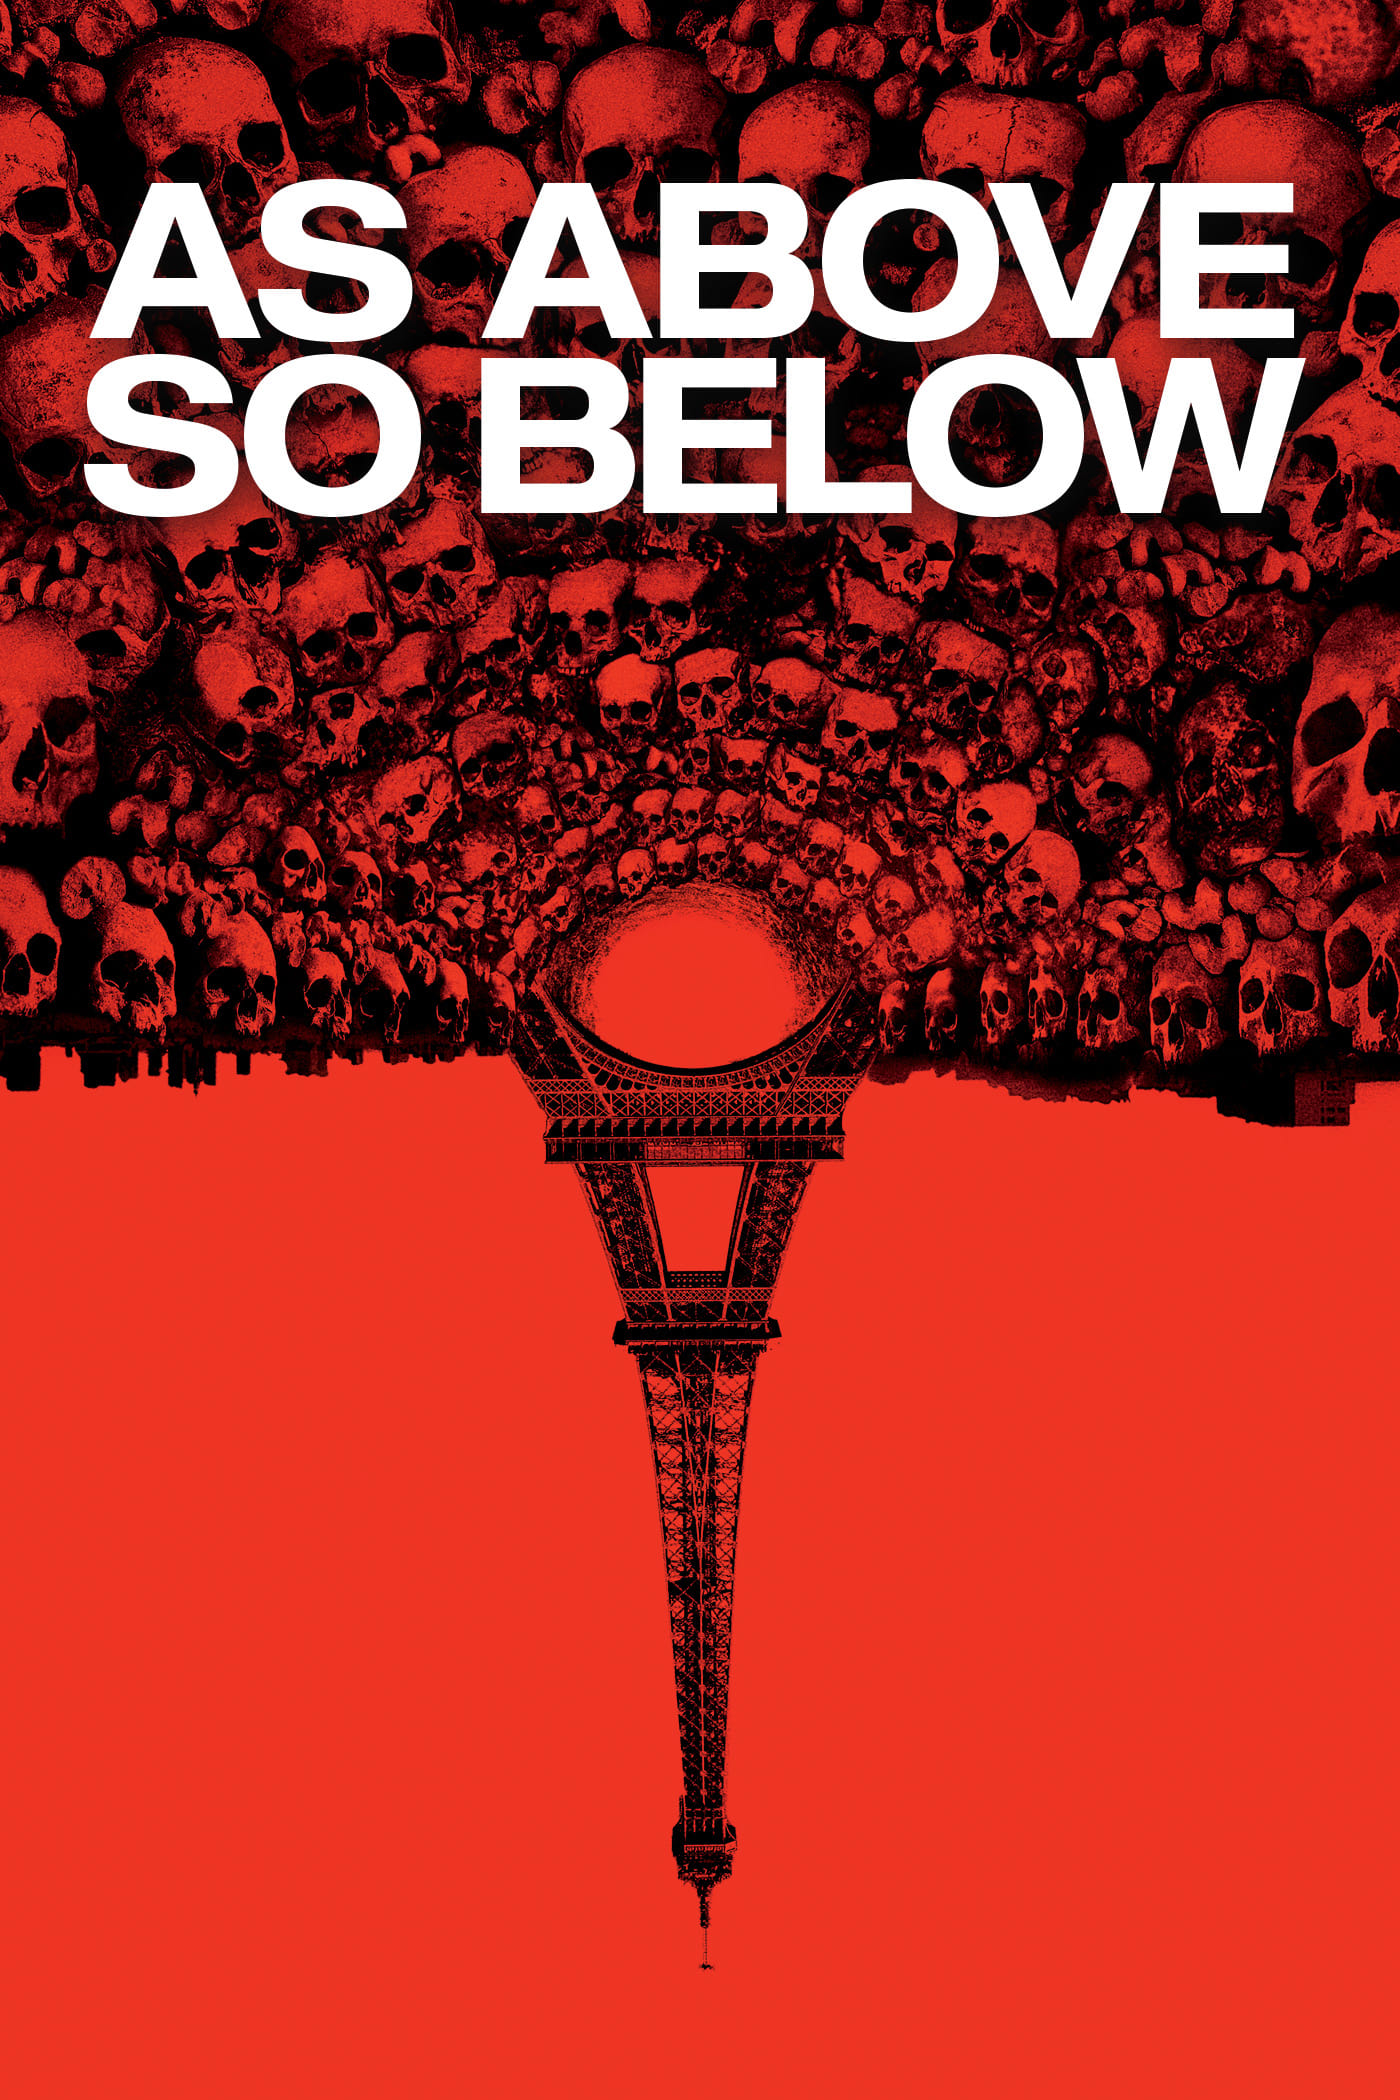 Poster for the movie "As Above, So Below"